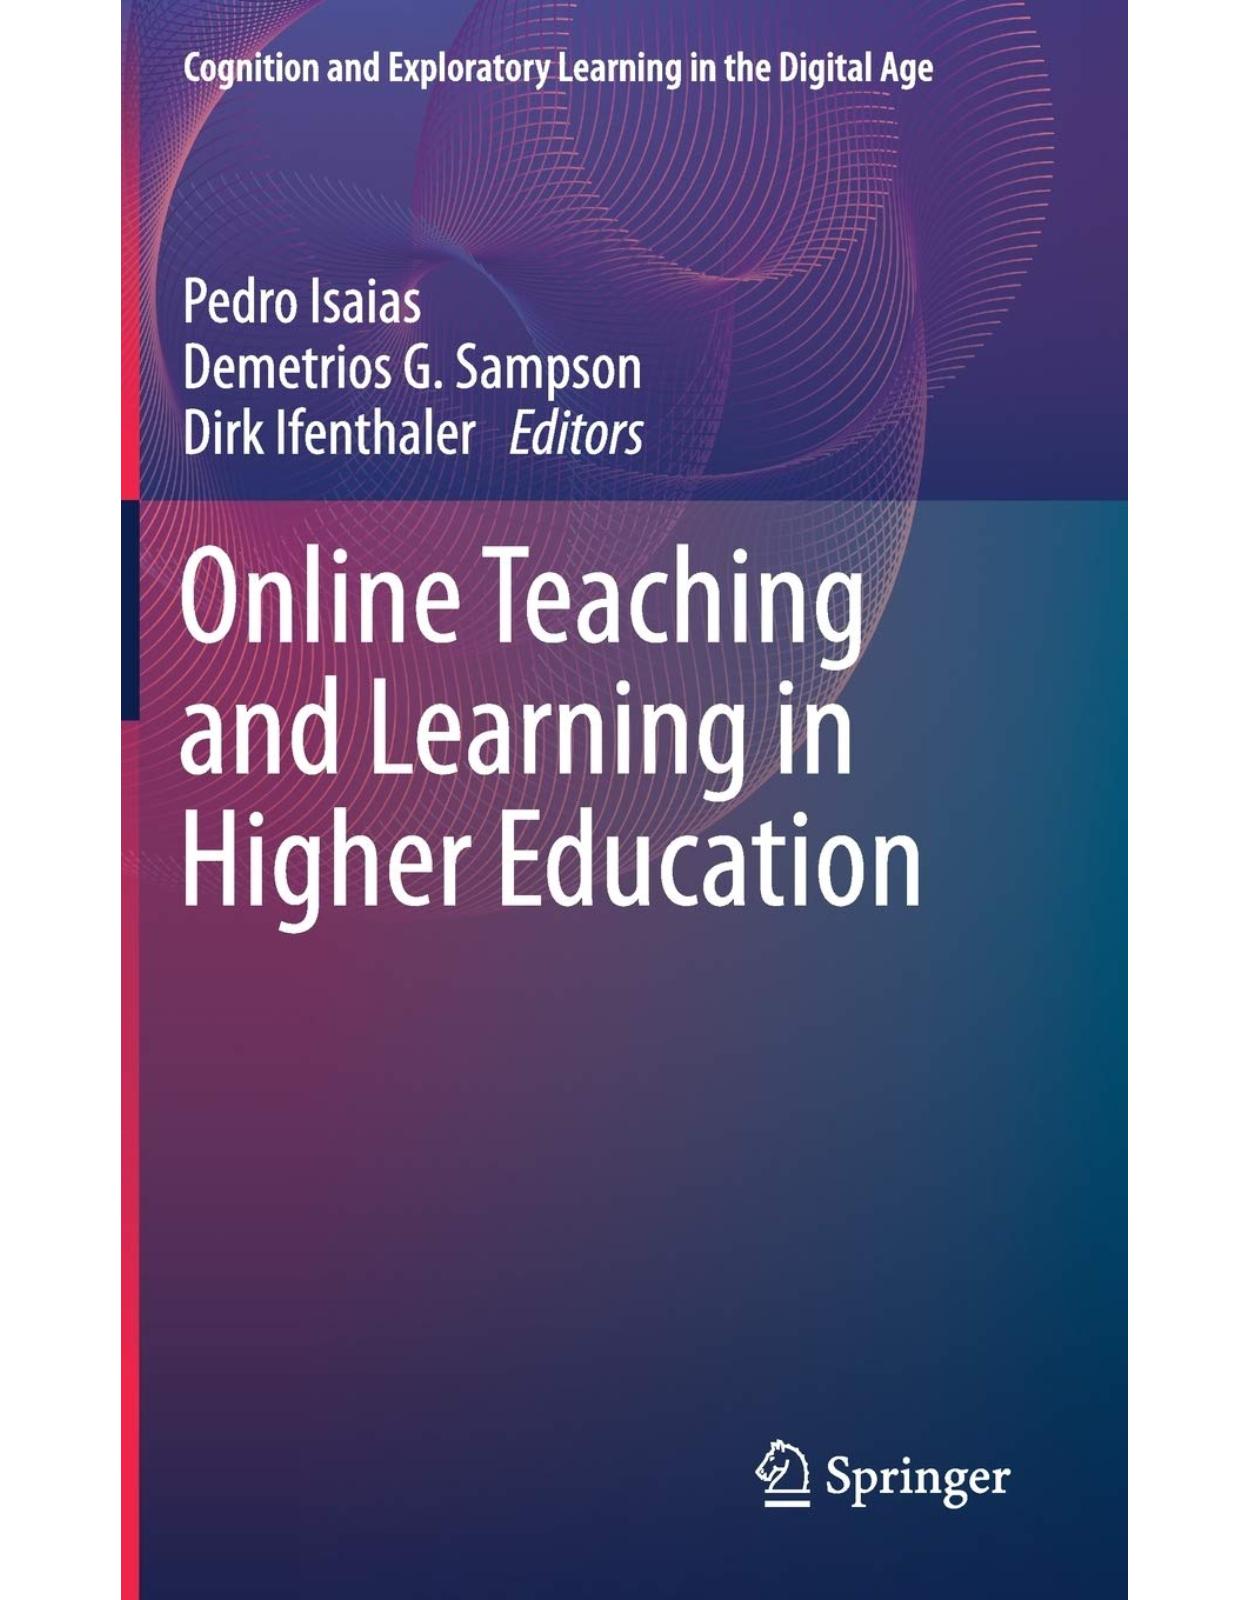 Online Teaching and Learning in Higher Education (Cognition and Exploratory Learning in the Digital Age) 